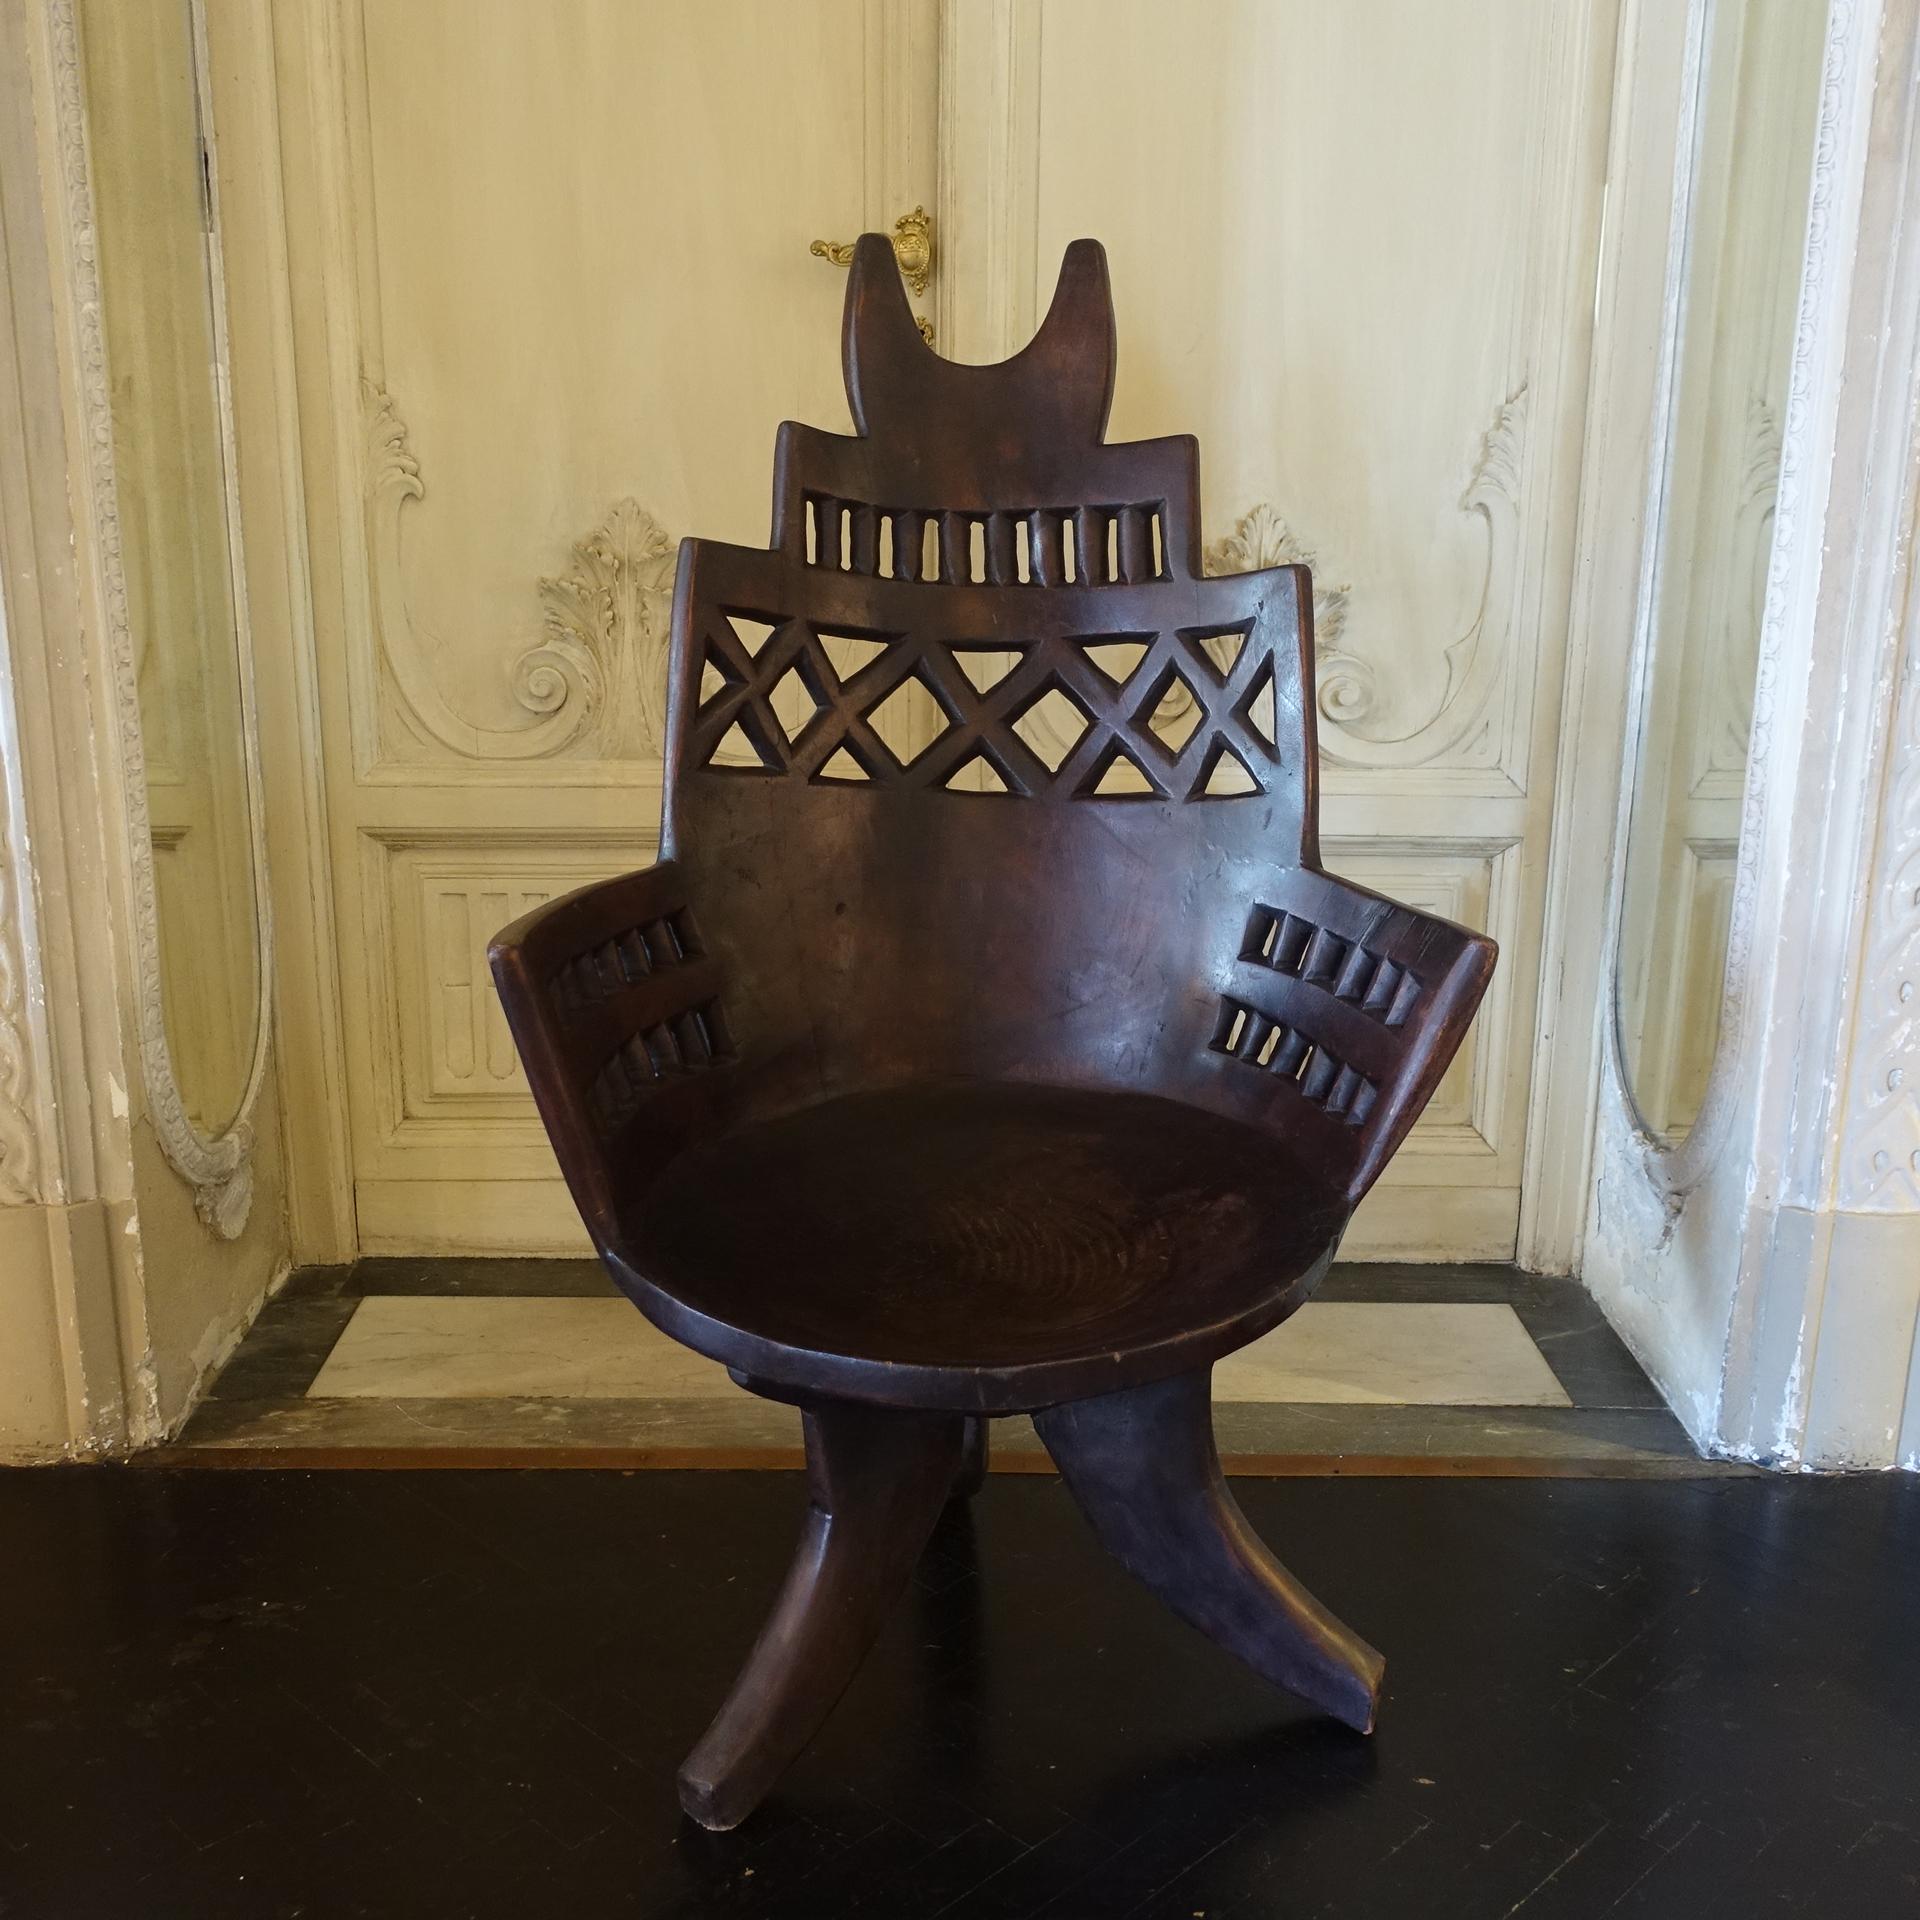 Early 20th Century one of a kind chair from the Jimma region, Ethiopia, carved from a single trunk of wood, the Jimma people did not use glue, nails or joinery in making these unique pieces, vintage patina.